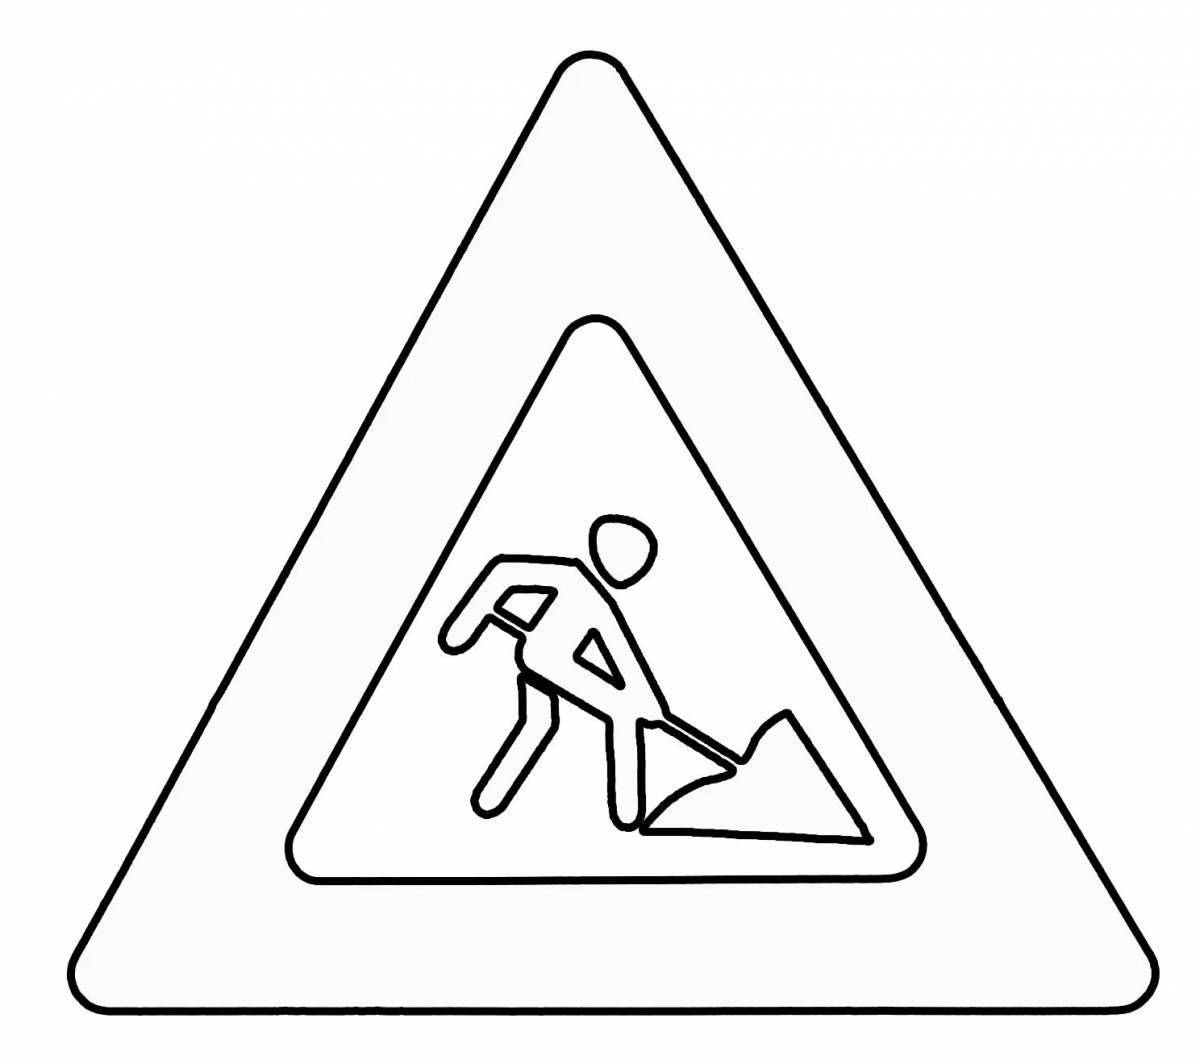 Primary school creative traffic signs coloring page